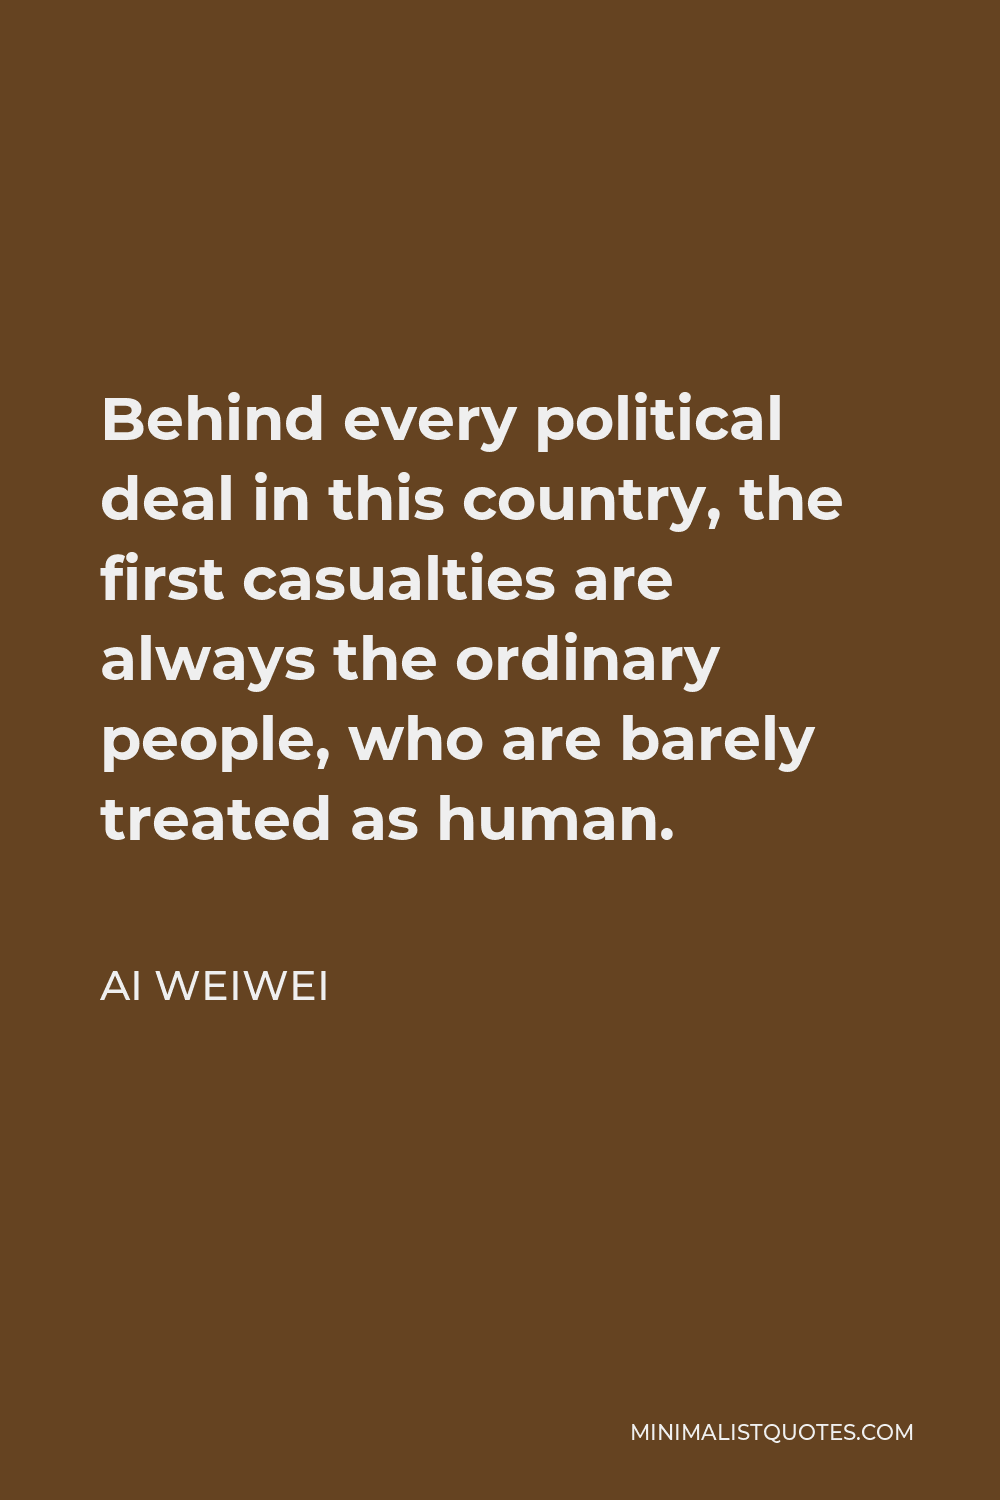 Ai Weiwei Quote - Behind every political deal in this country, the first casualties are always the ordinary people, who are barely treated as human.